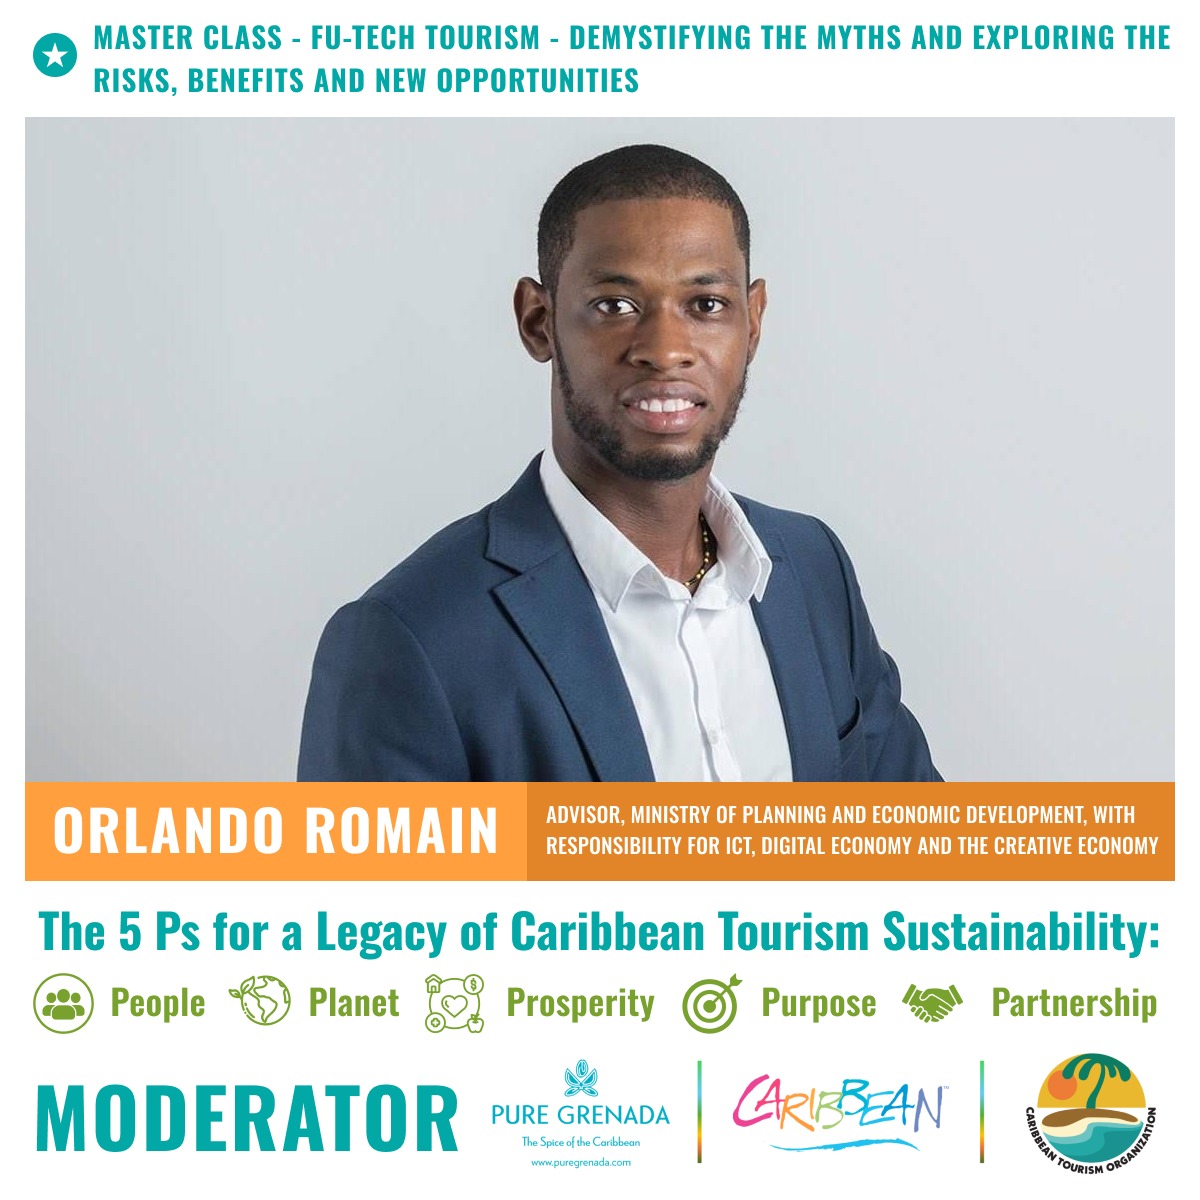 Entrepreneur and accomplished creative professional Grenadian Orlando Romain will share his expertise and knowledge on emerging technologies as he moderates our “Master Class — Fu-Tech Tourism” discussion at #STC2024 on Tuesday, April 23. caribbeanstc.com/session/master…